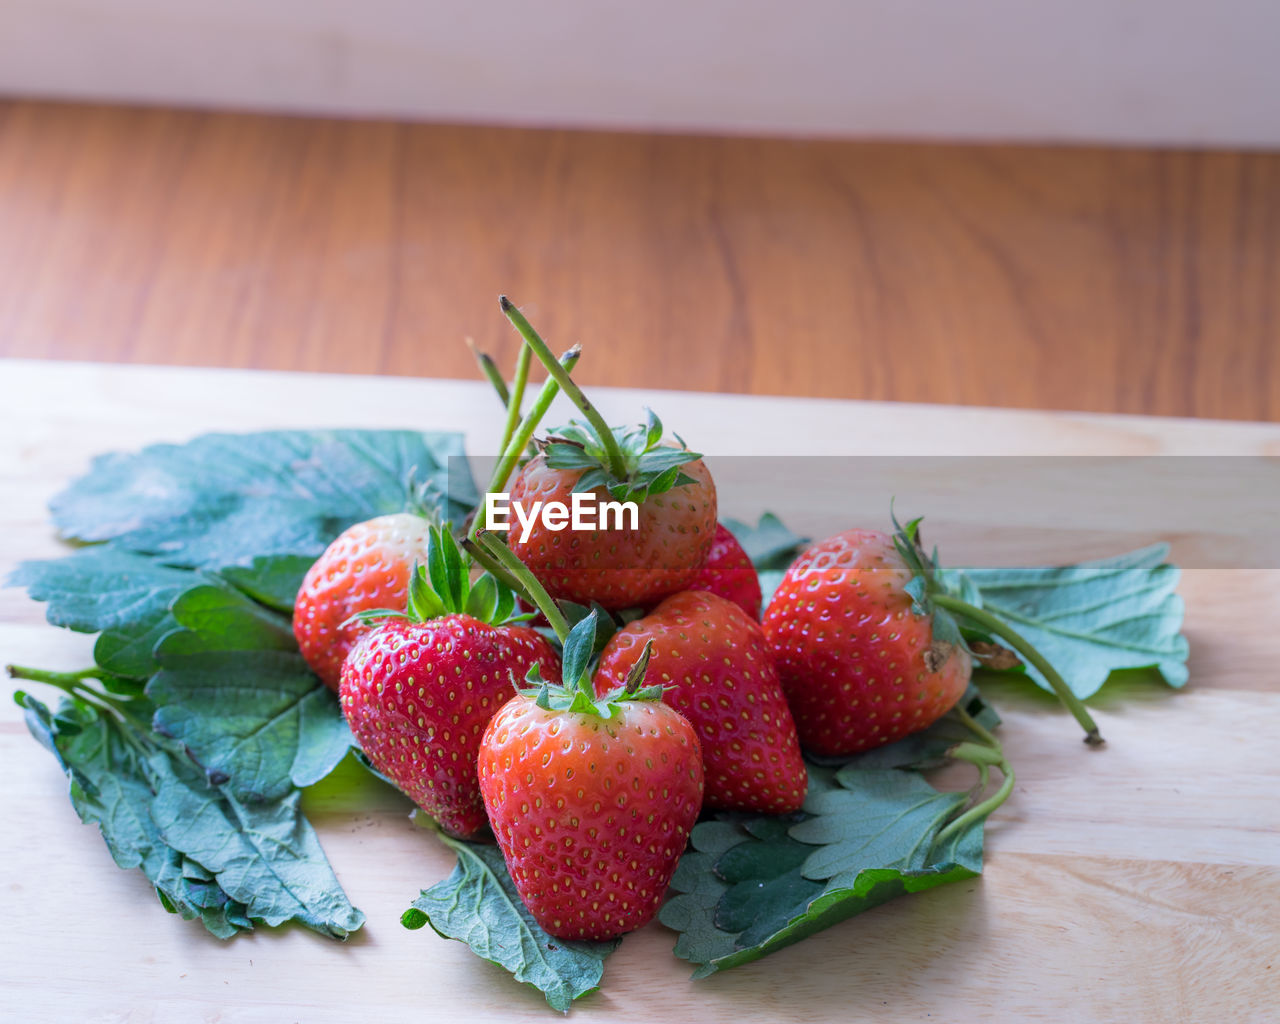 CLOSE-UP OF FRESH STRAWBERRIES ON TABLE